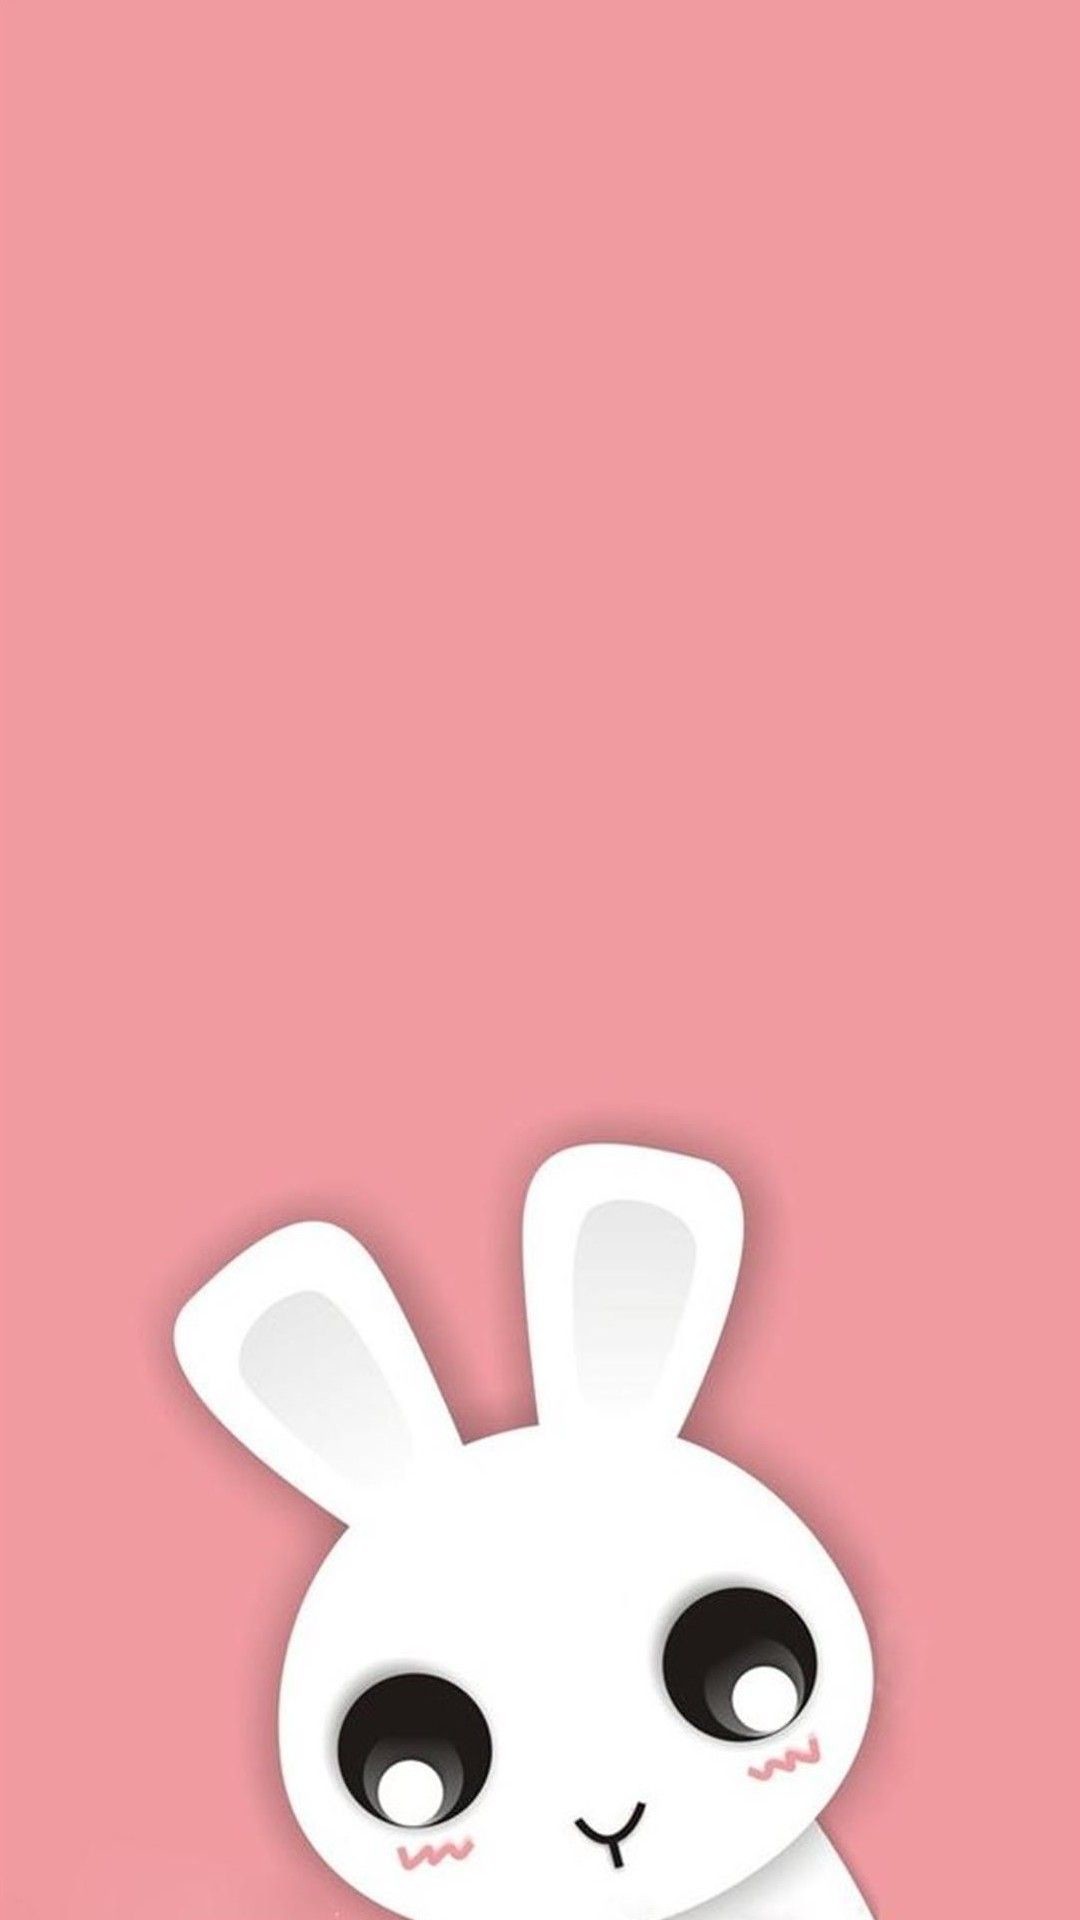 1080x1920 Cute Wallpaper for Android Phone (75+ images)